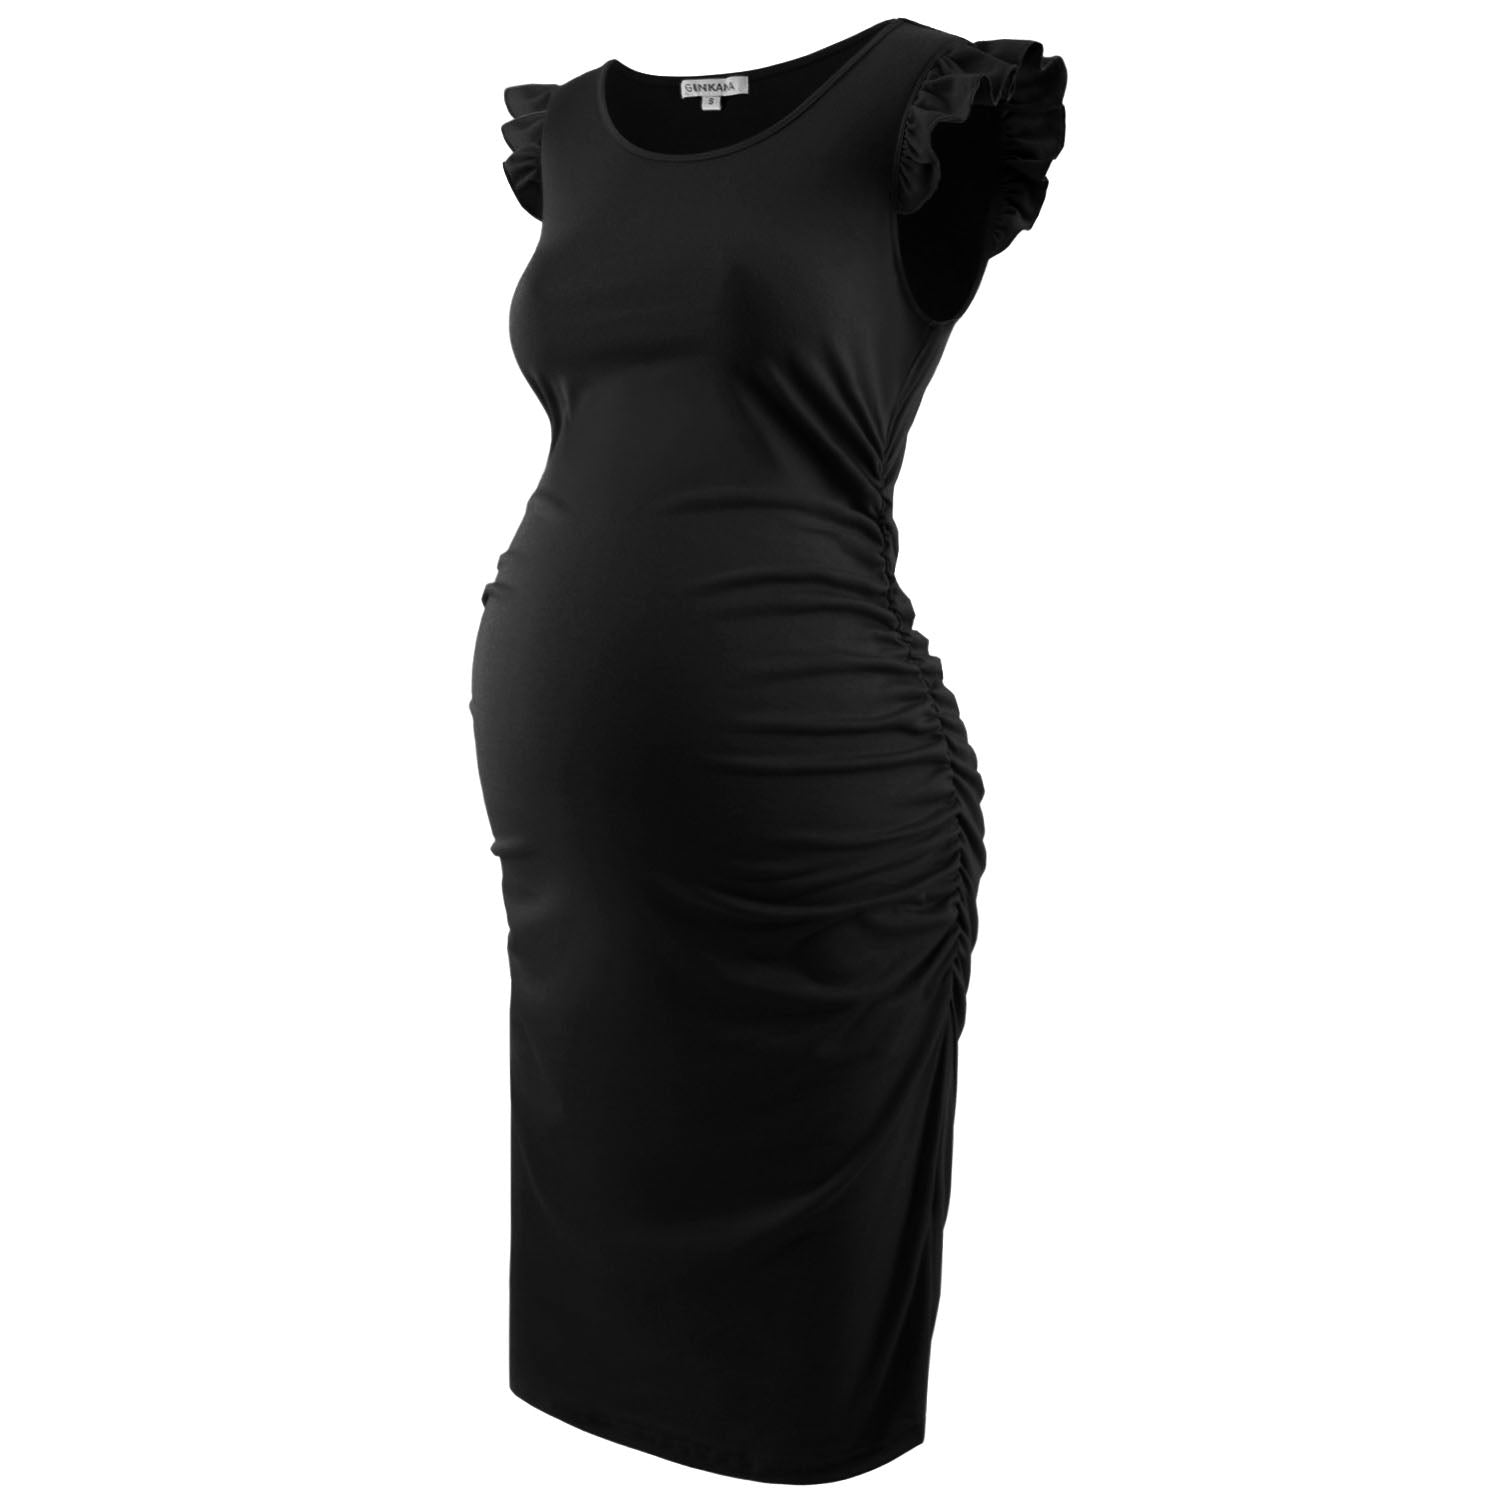 Buy Black Rib Side Cut-Out Bodycon Dress Online At Best Price - Sassafras.in